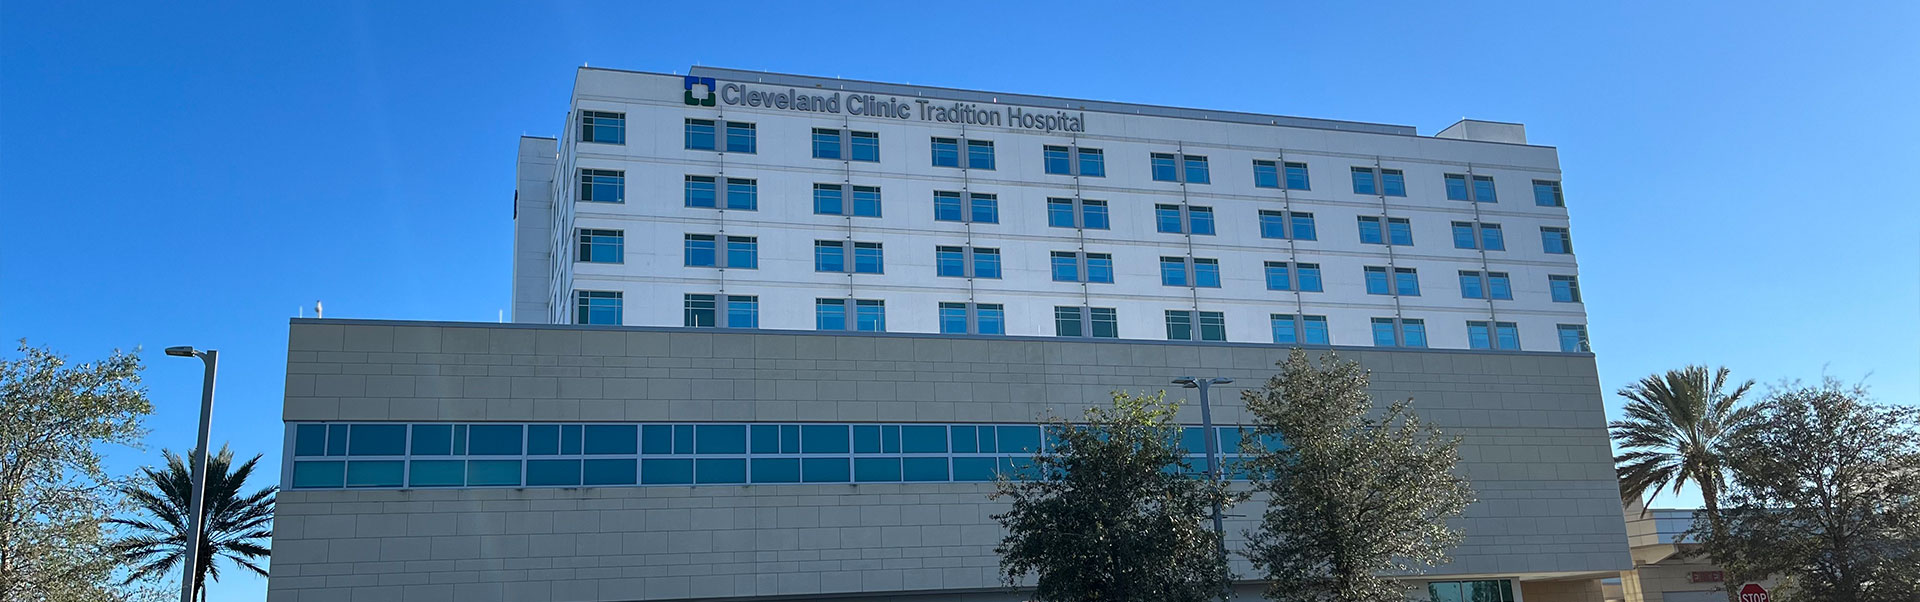 exterior of the cleveland clinic hospital in tradition